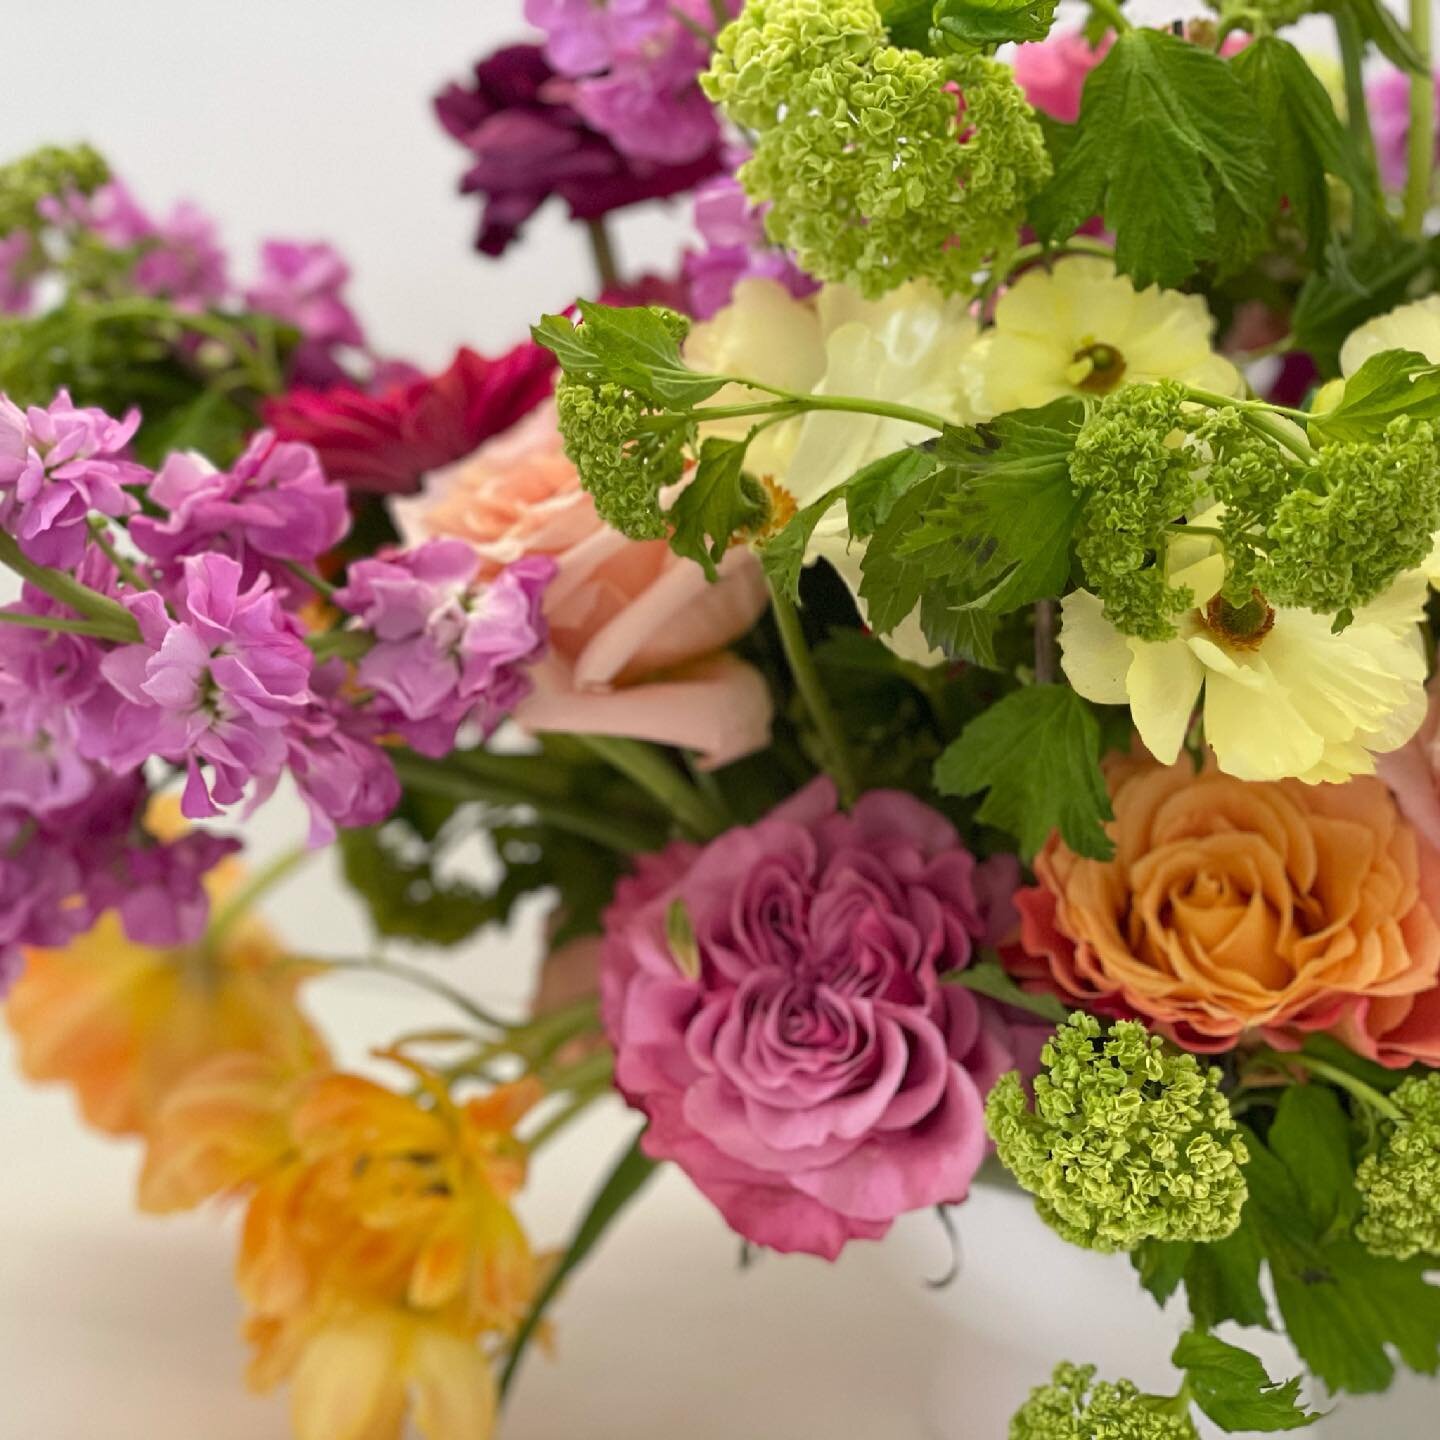 Wellness Wednesday:  Flowers definitely brighten a room, but did you know that research proves that when a floral arrangement is present in a room, it actually promotes a positive environment and uplifts your mood?They reduce anxiety, help with depre